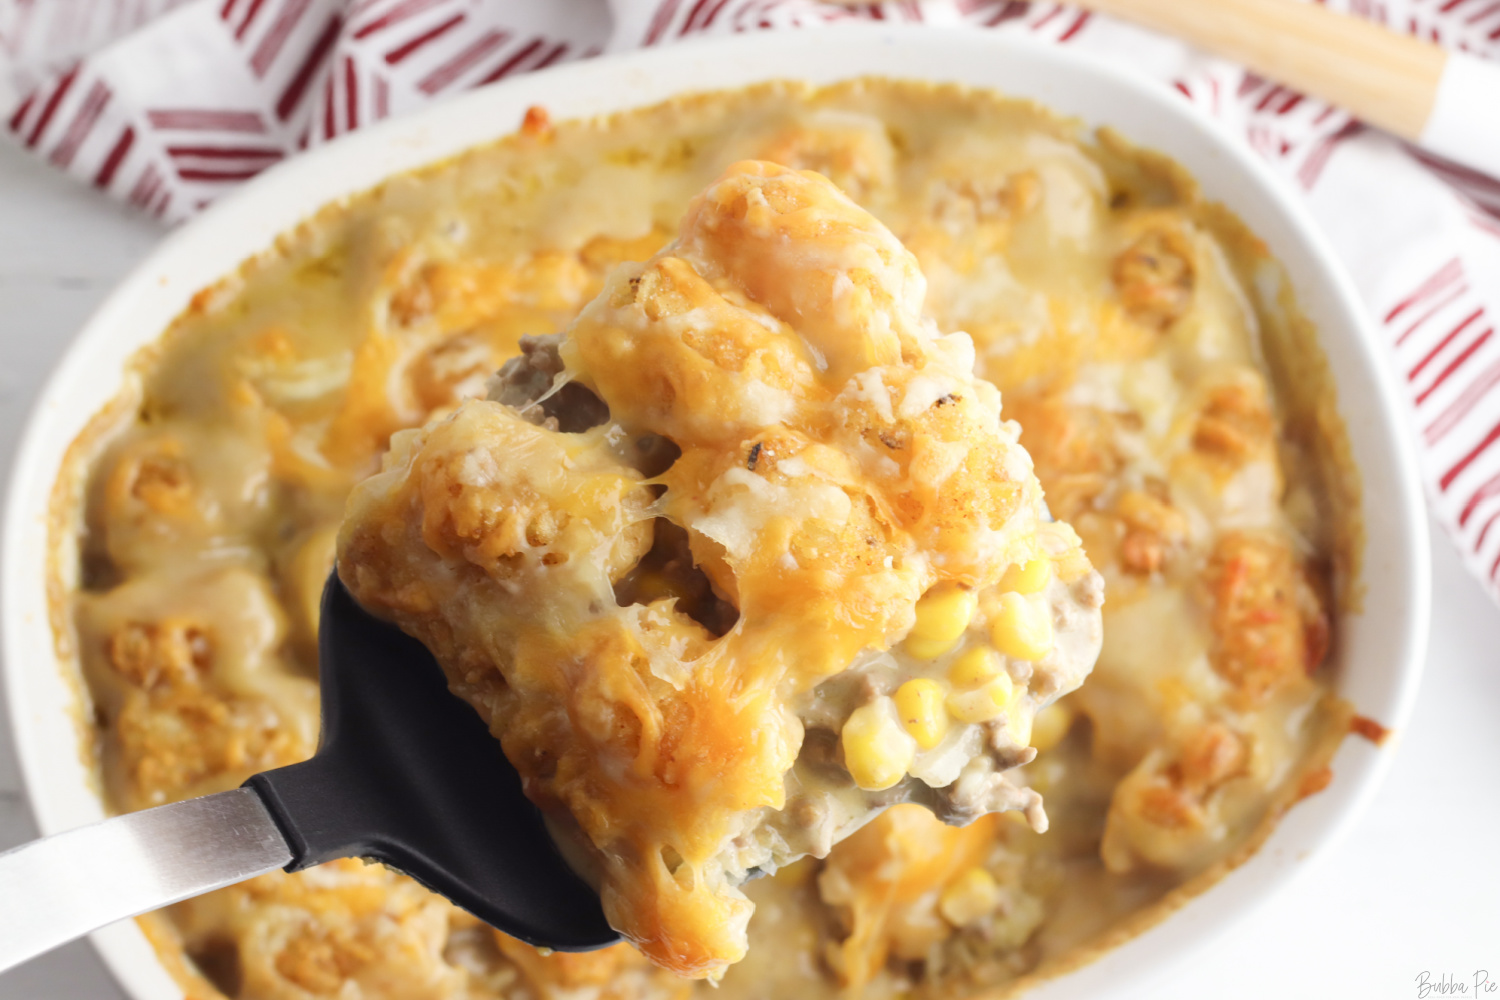 Cowboy Casserole Recipe is a great dish to bring to potlucks